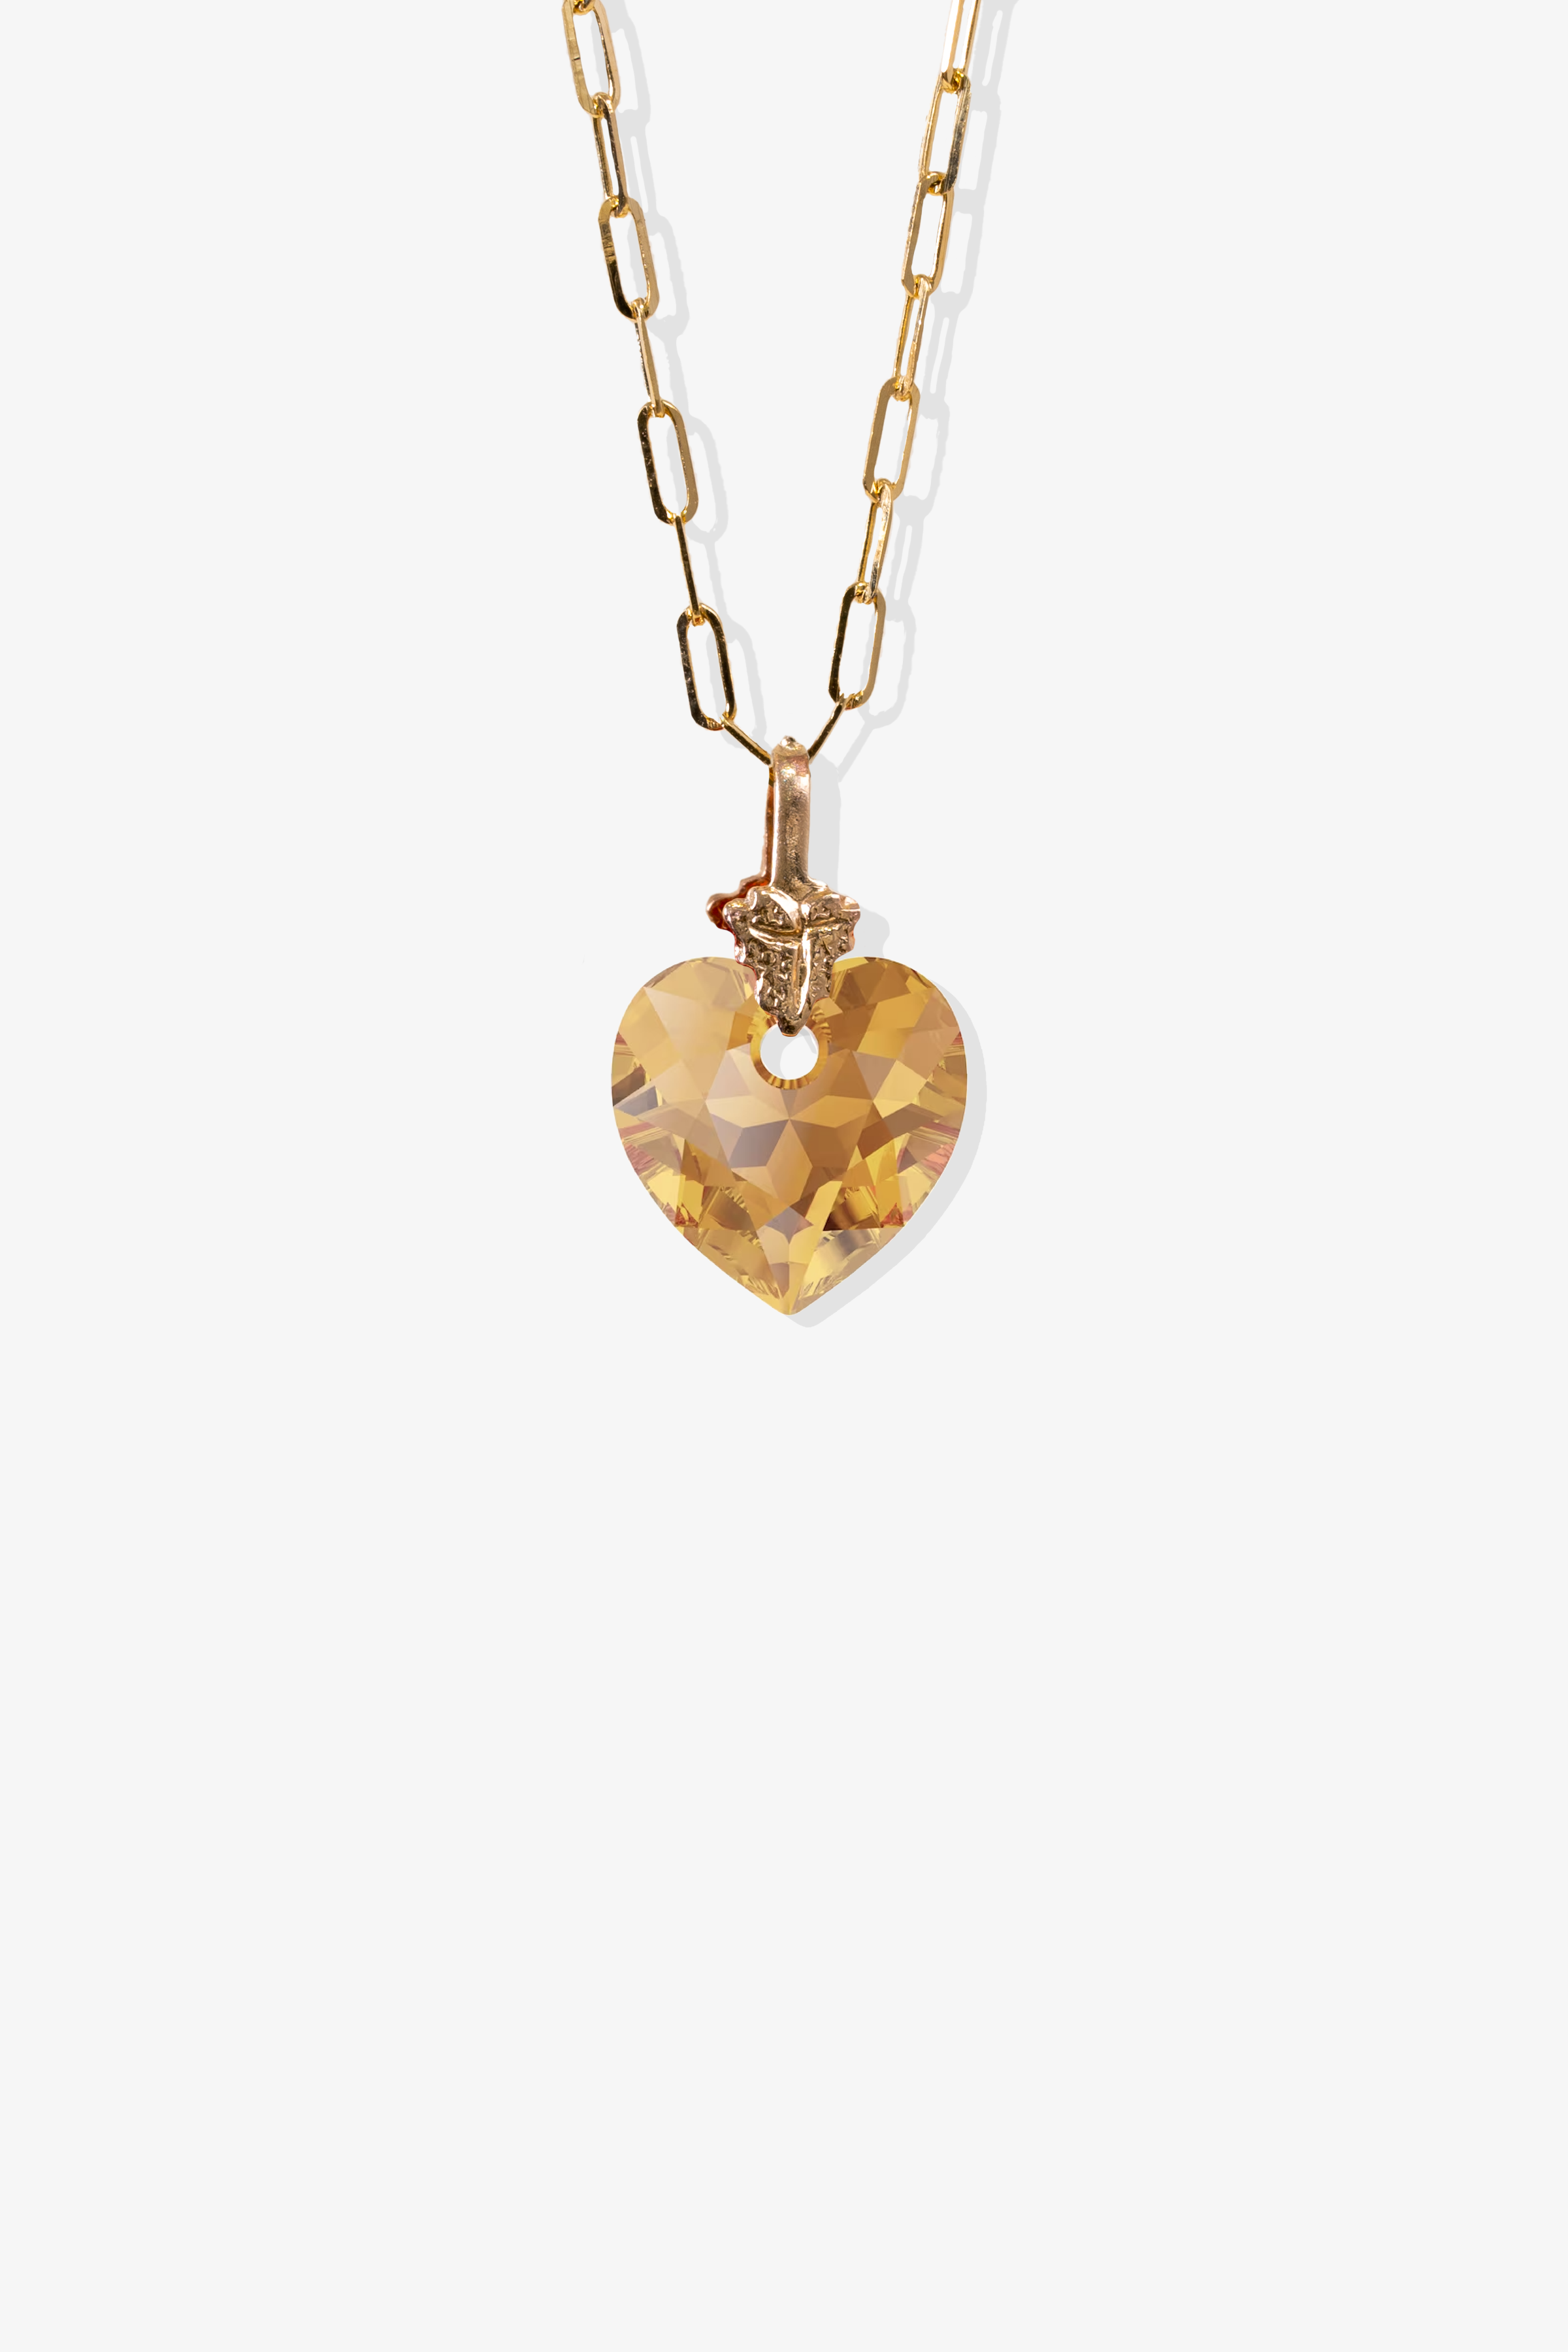 Petite Swarovski Xilion Citrine Yellow Crystal Heart with REAL 14k Gold Paperclip Necklace